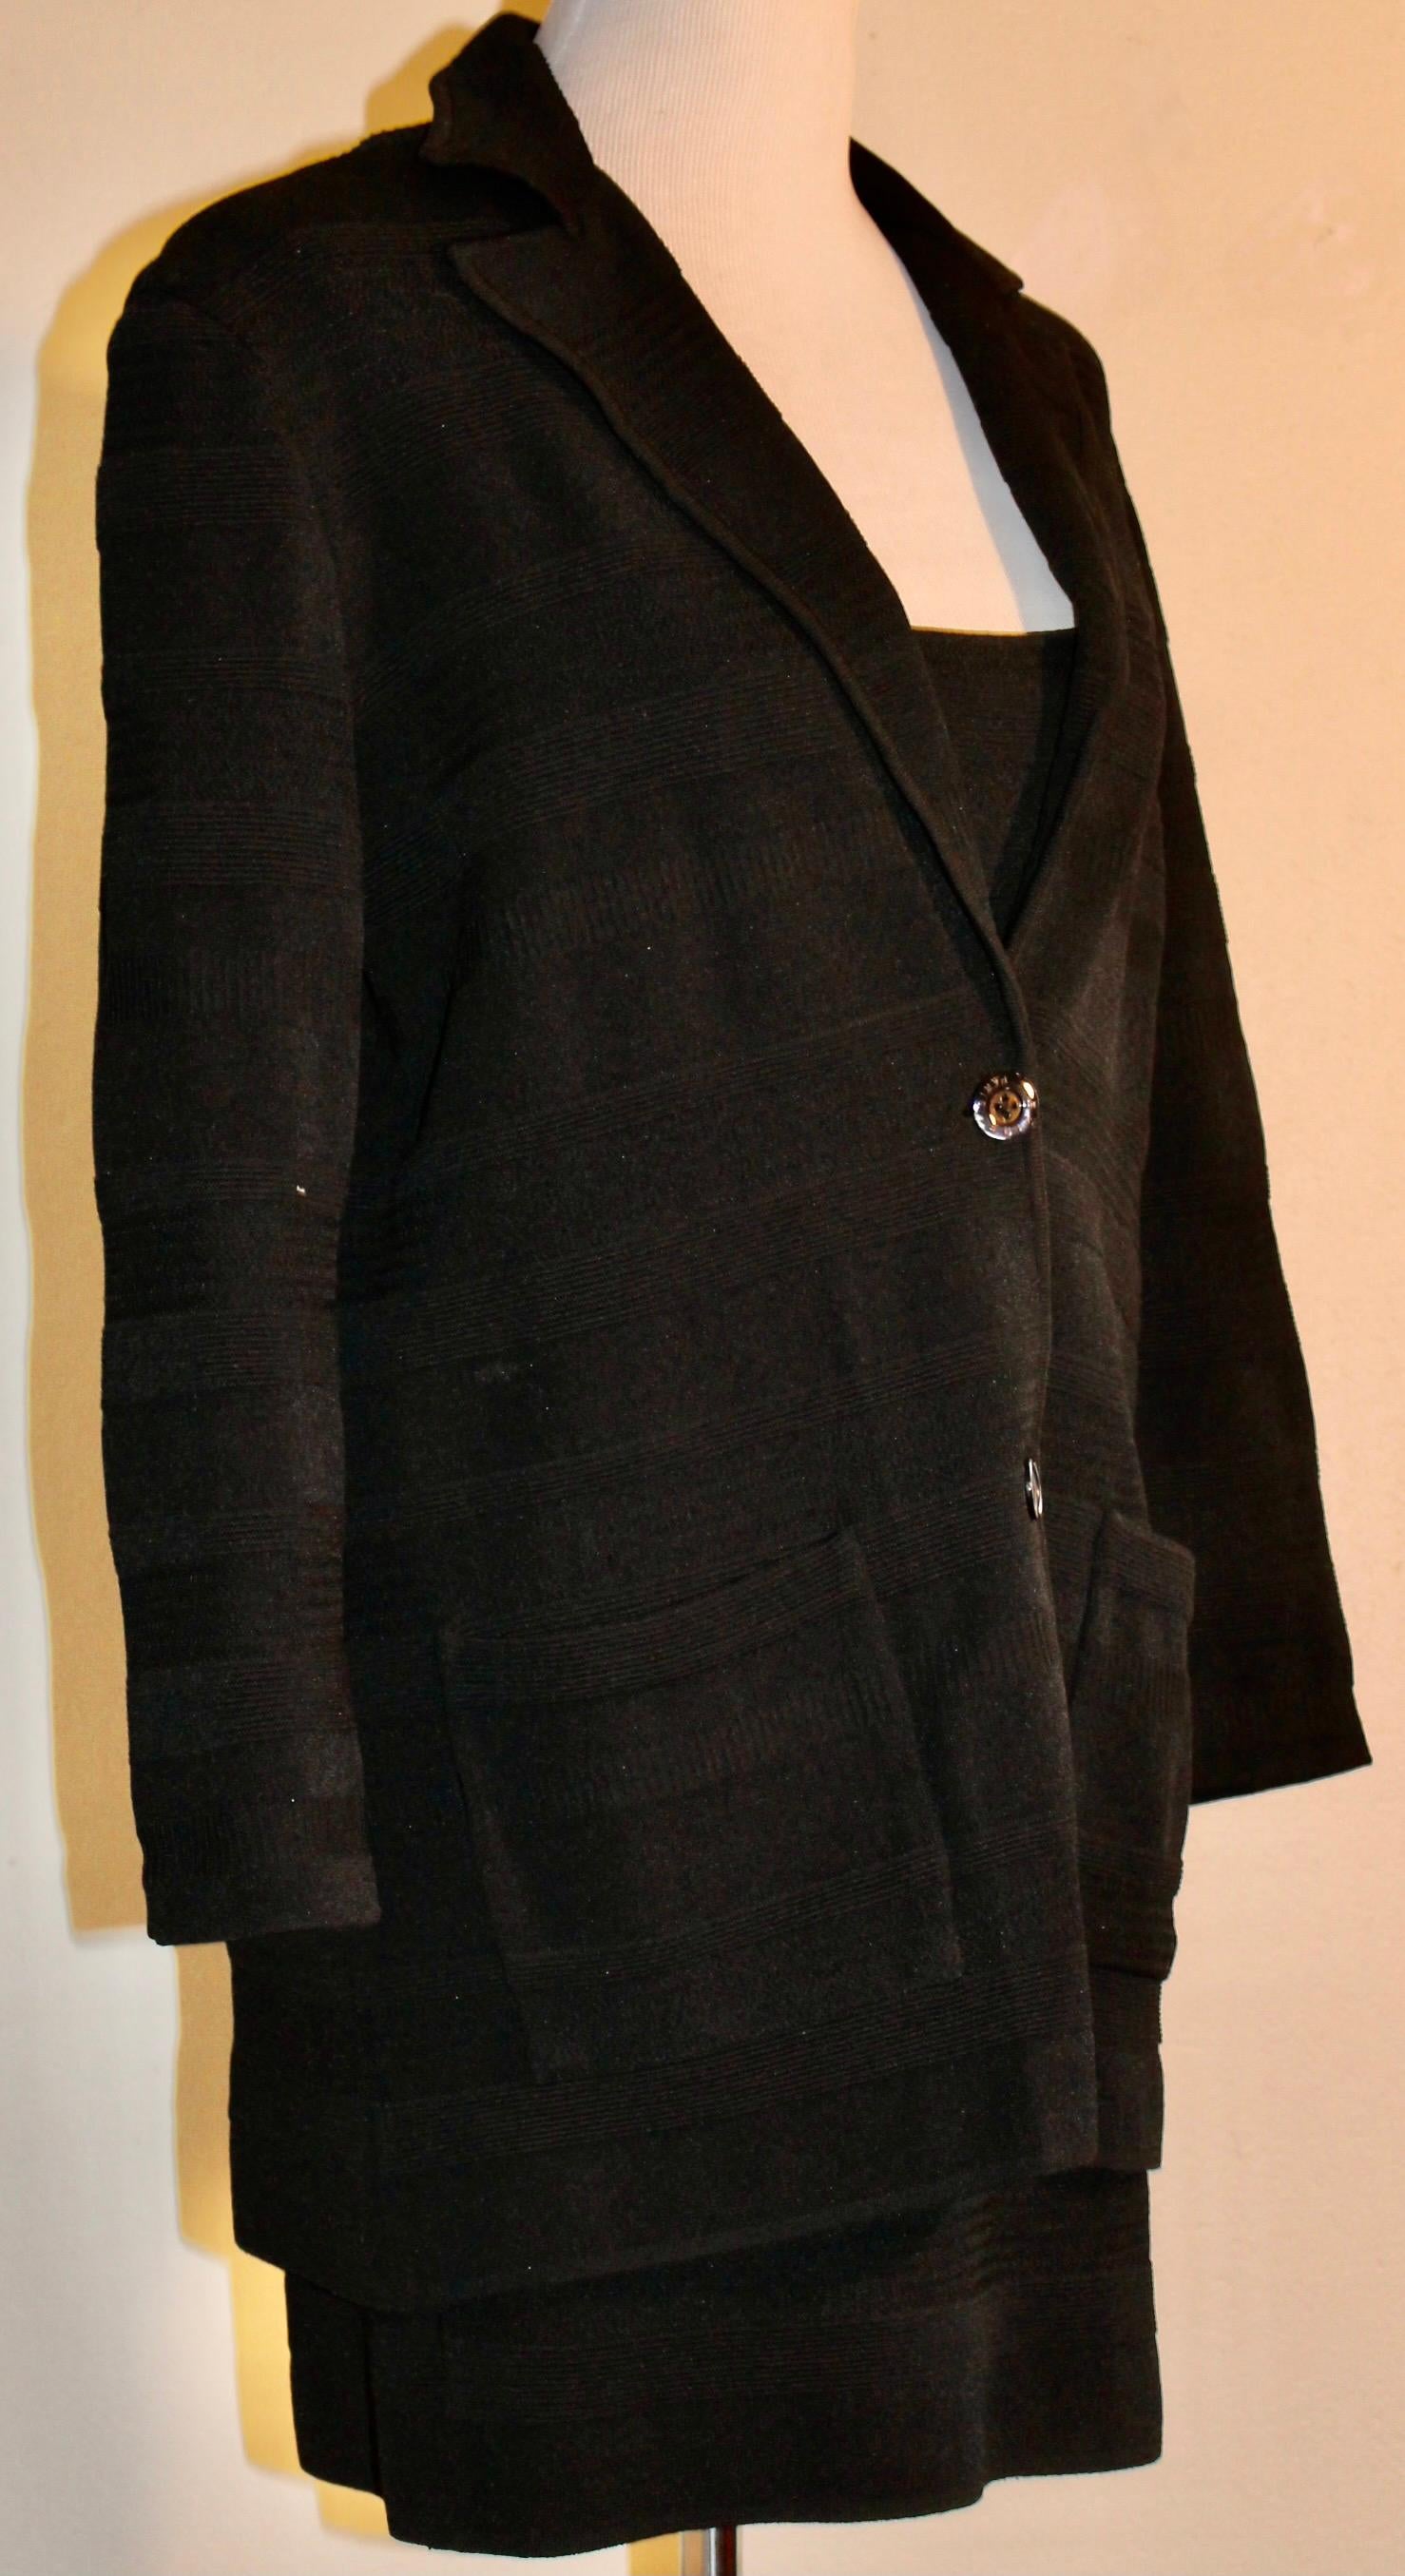 Celine Paris Black Dress and Jacket In Excellent Condition For Sale In Sharon, CT